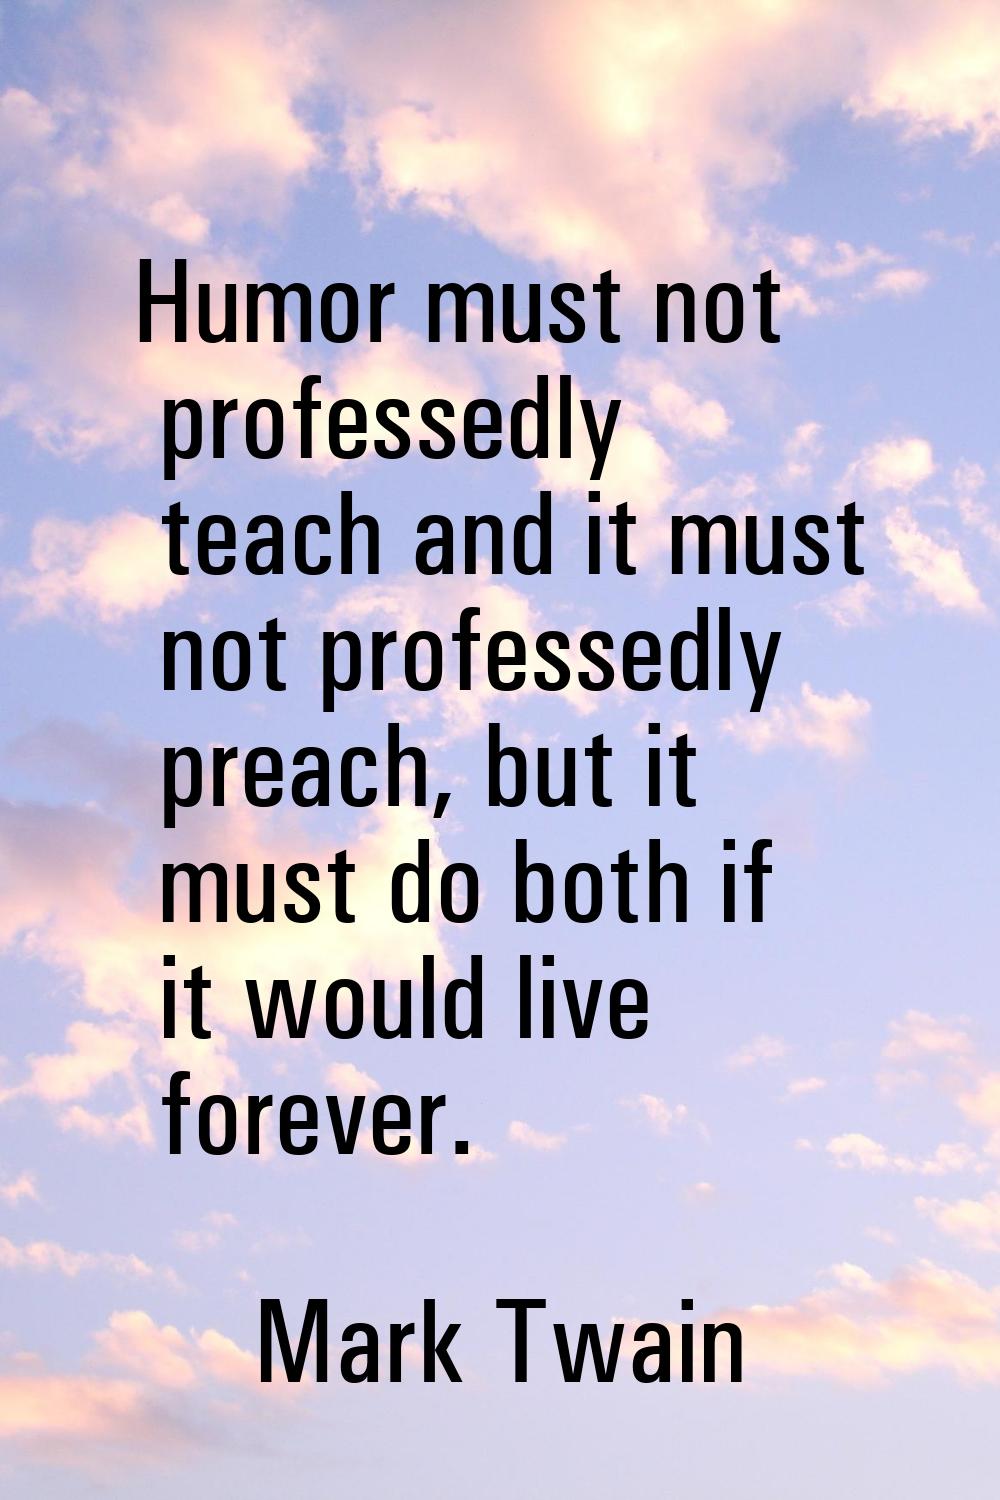 Humor must not professedly teach and it must not professedly preach, but it must do both if it woul